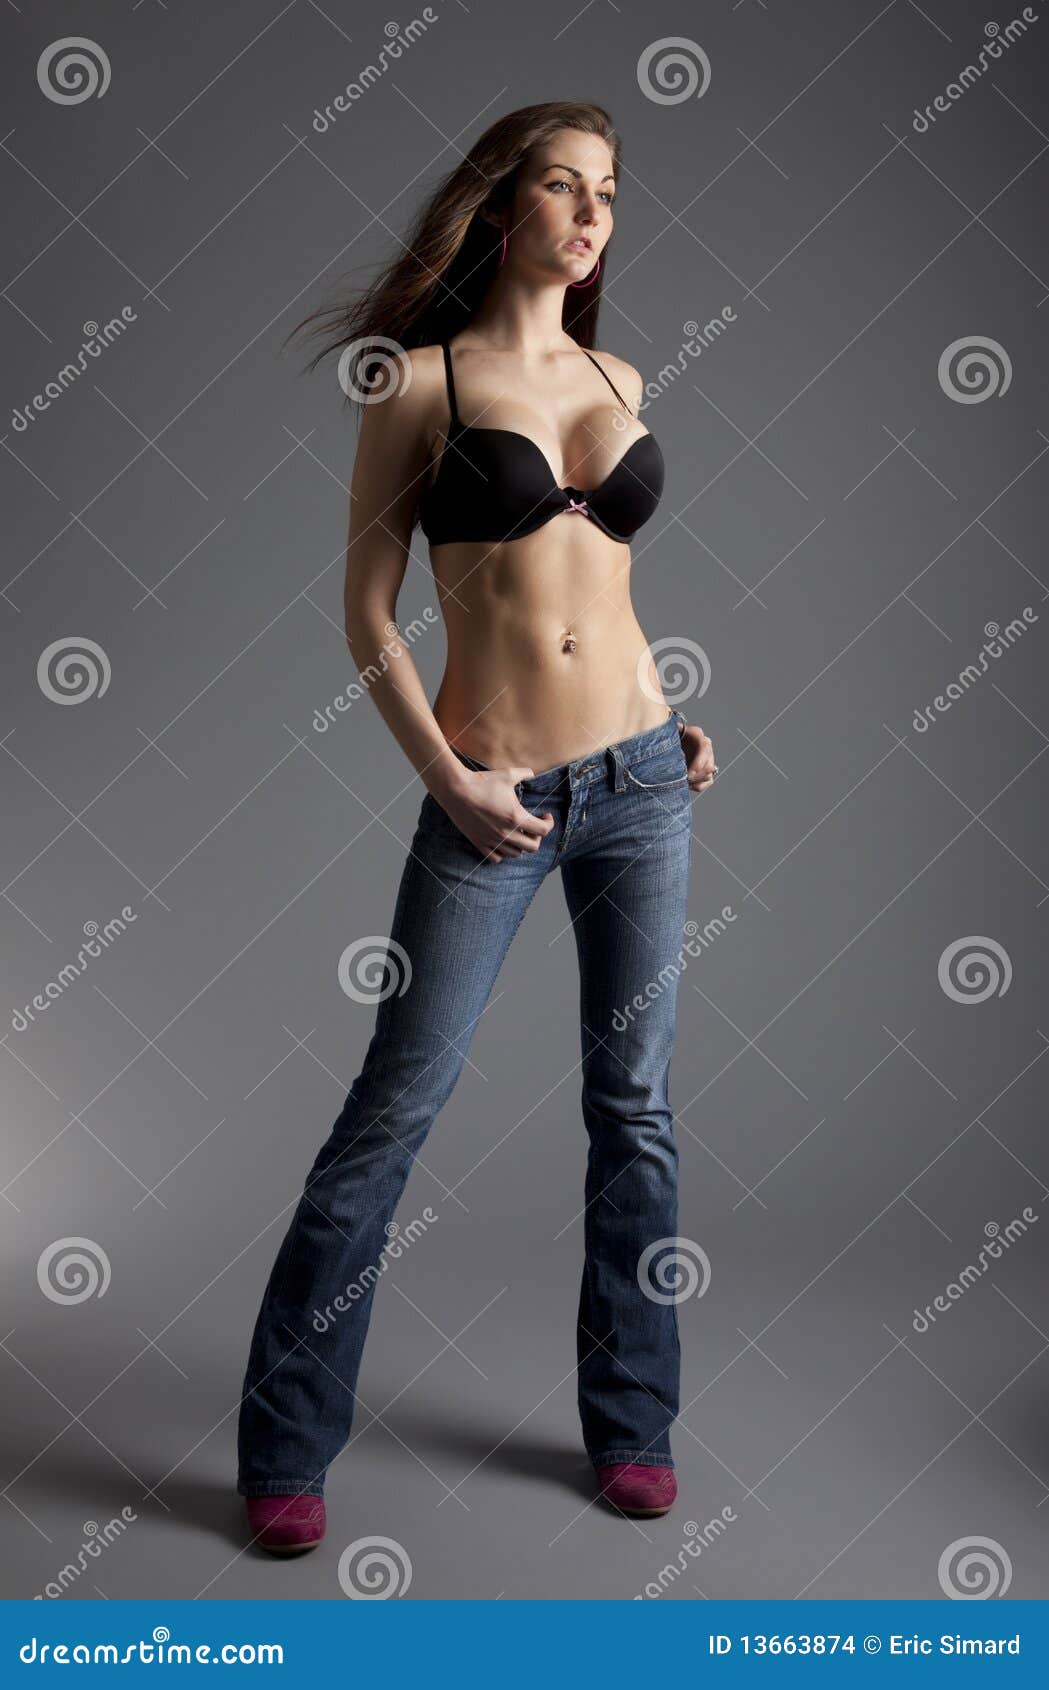 Model in Jeans and Bra stock photo. Image of jeans, studio - 13663874